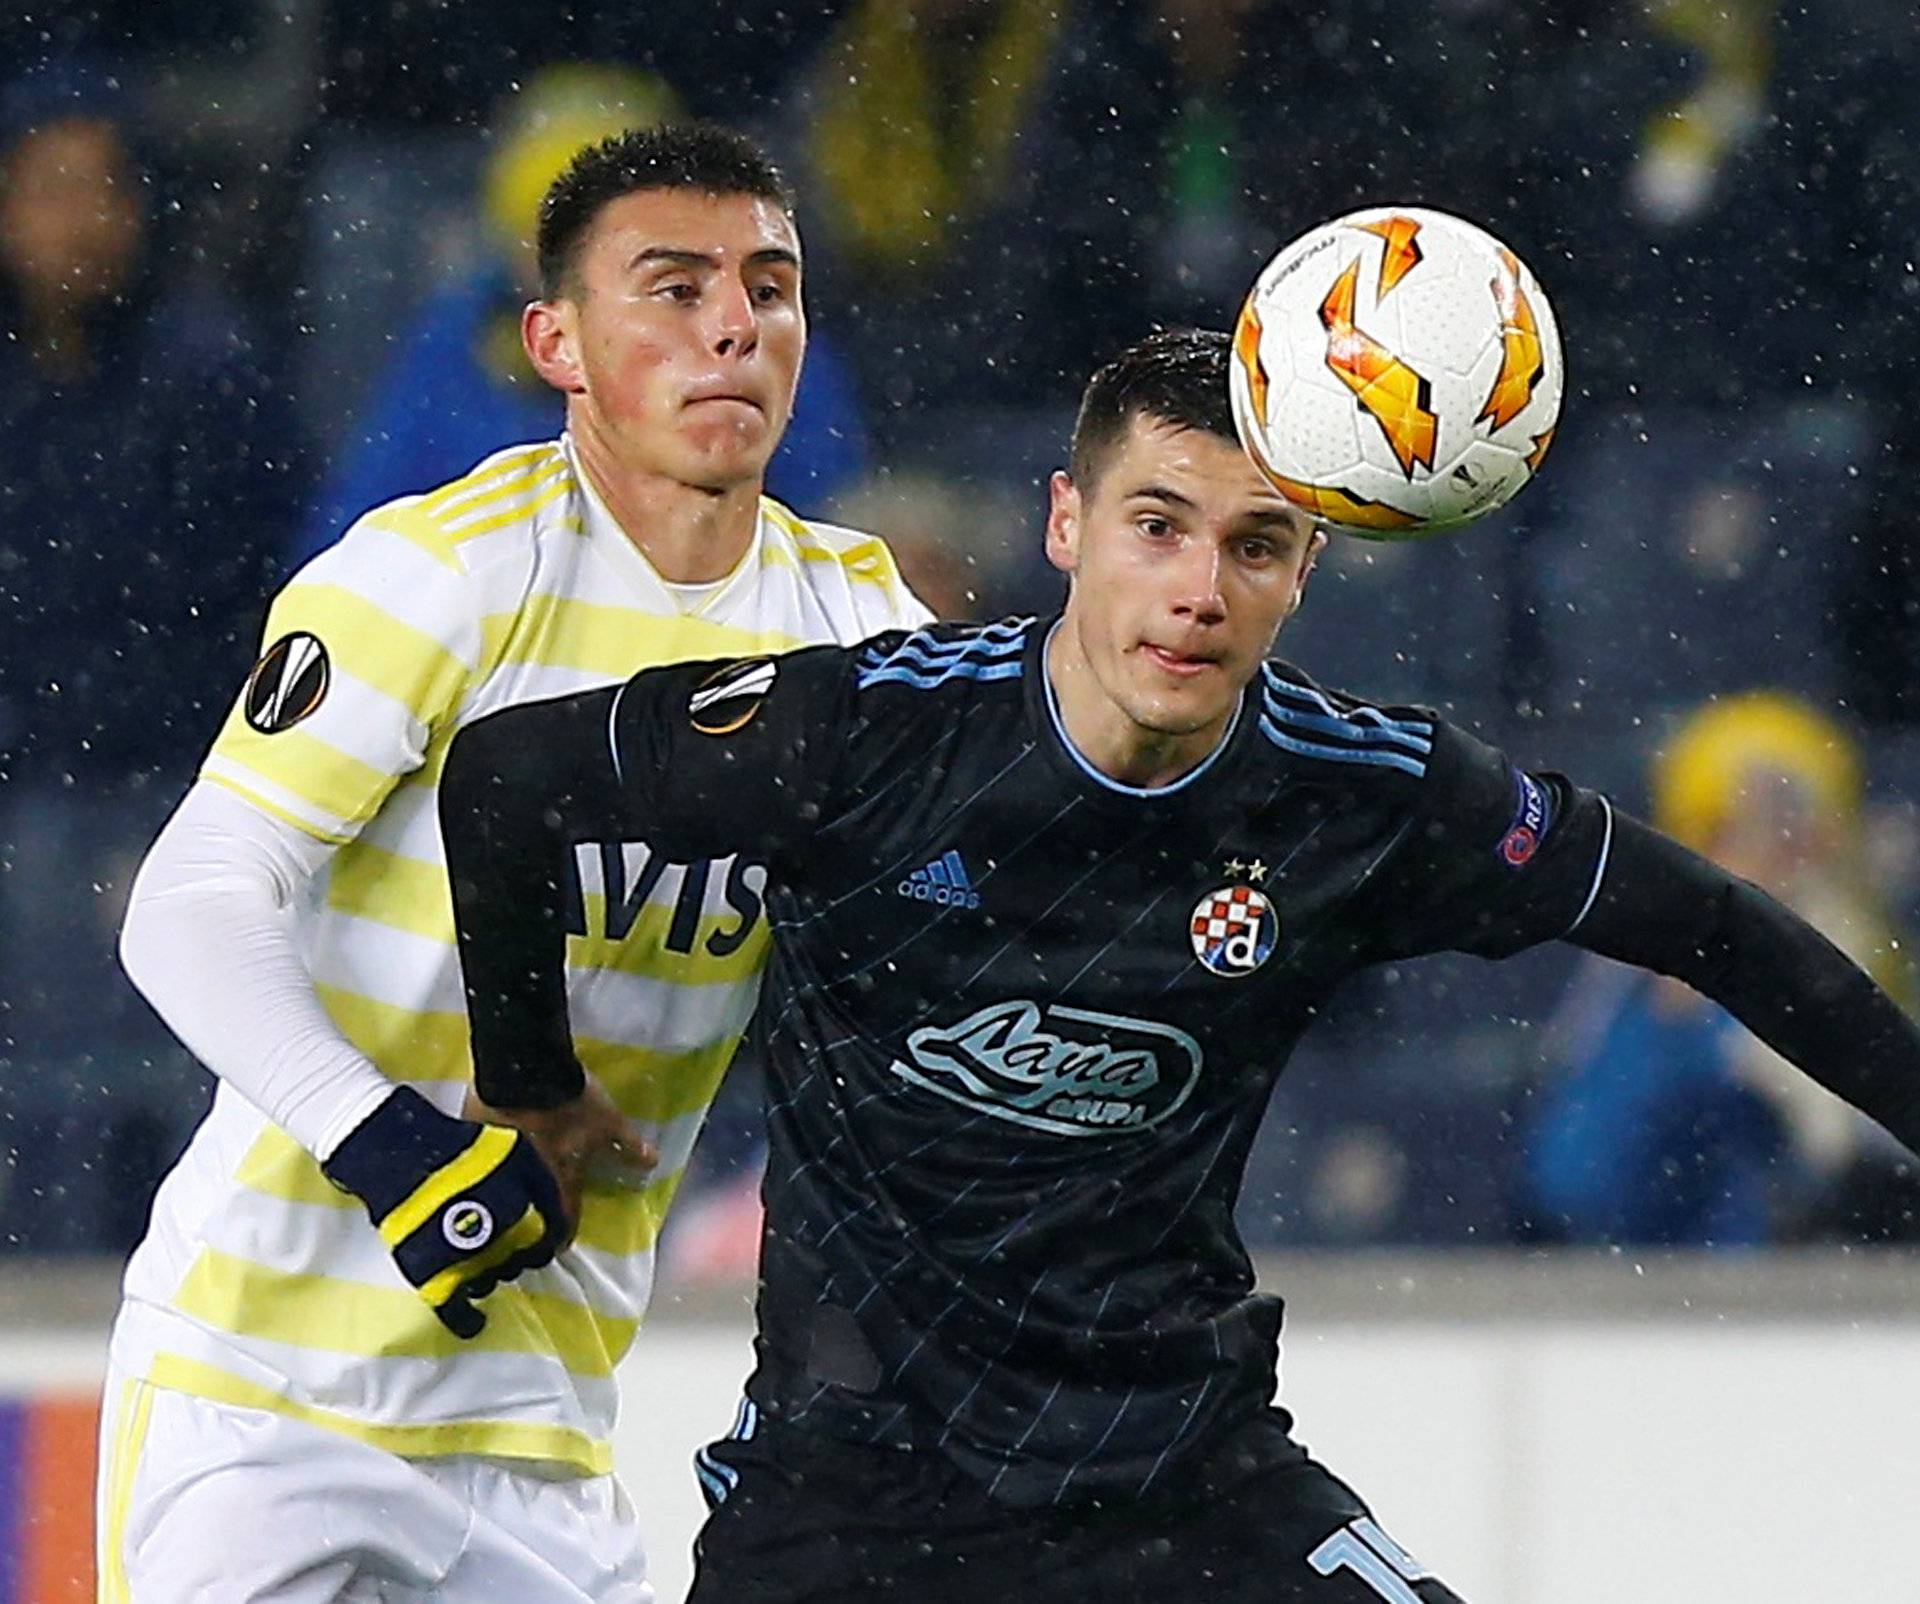 Europa League - Group Stage - Group D - Fenerbahce v GNK Dinamo Zagreb